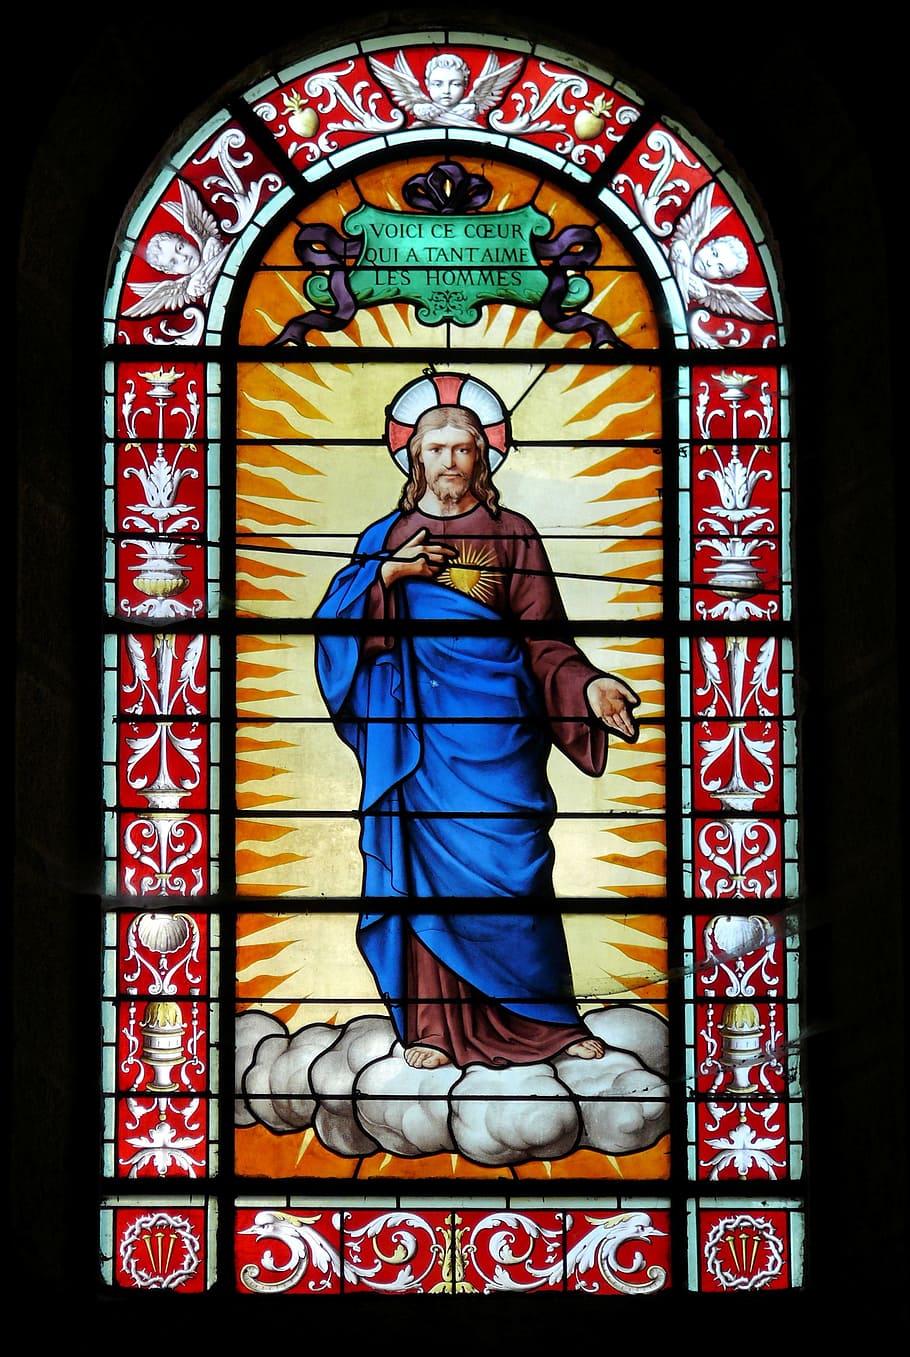 stained, glass window, Stained Glass Window, Church, religion, spirituality, stained glass, window, place of worship, multi colored